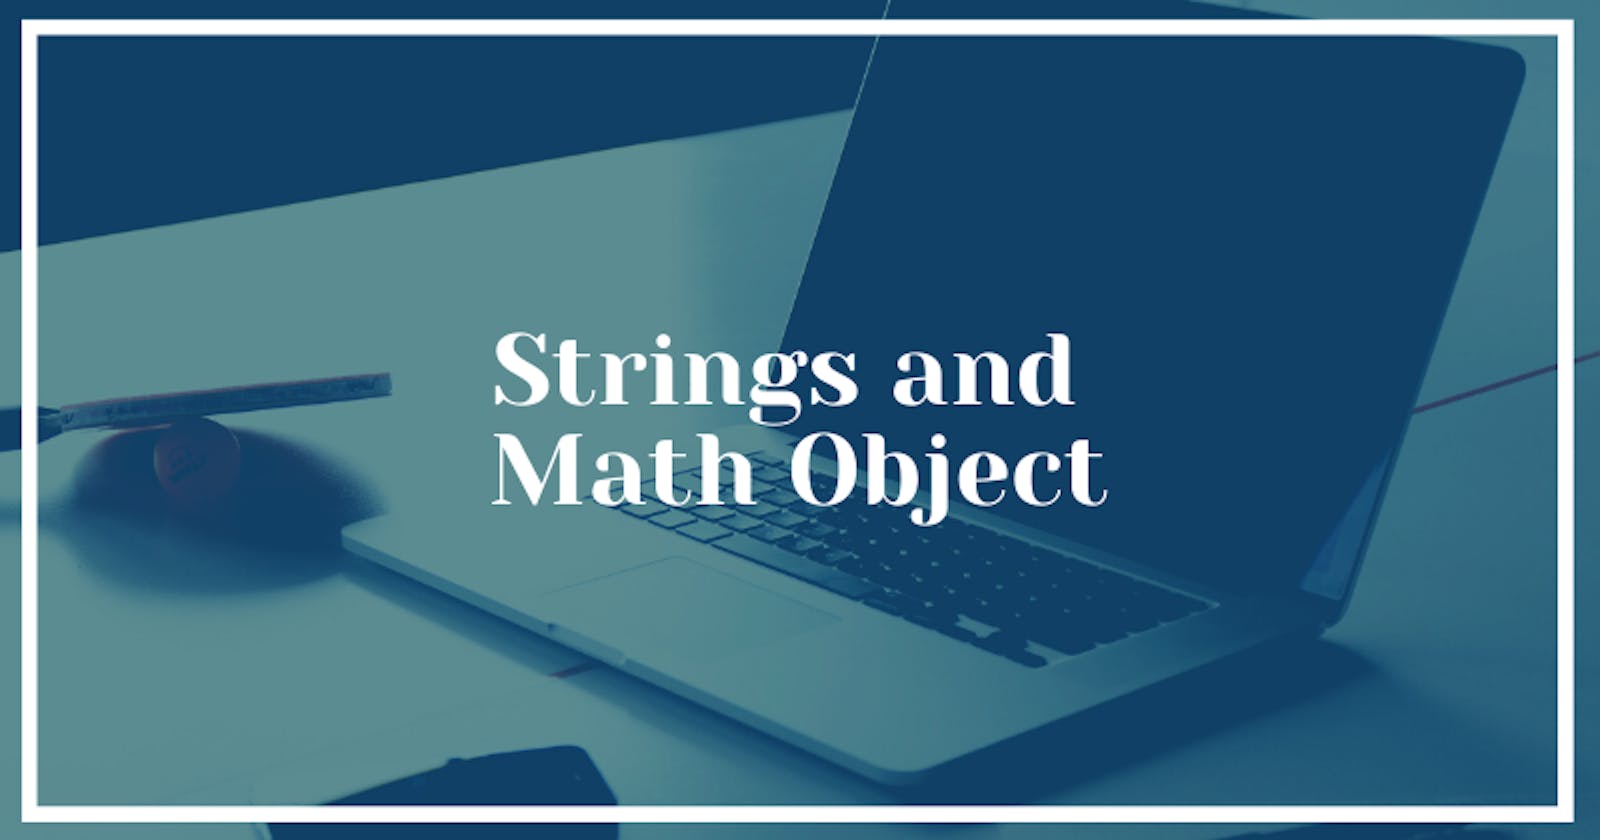 Strings and Math Object